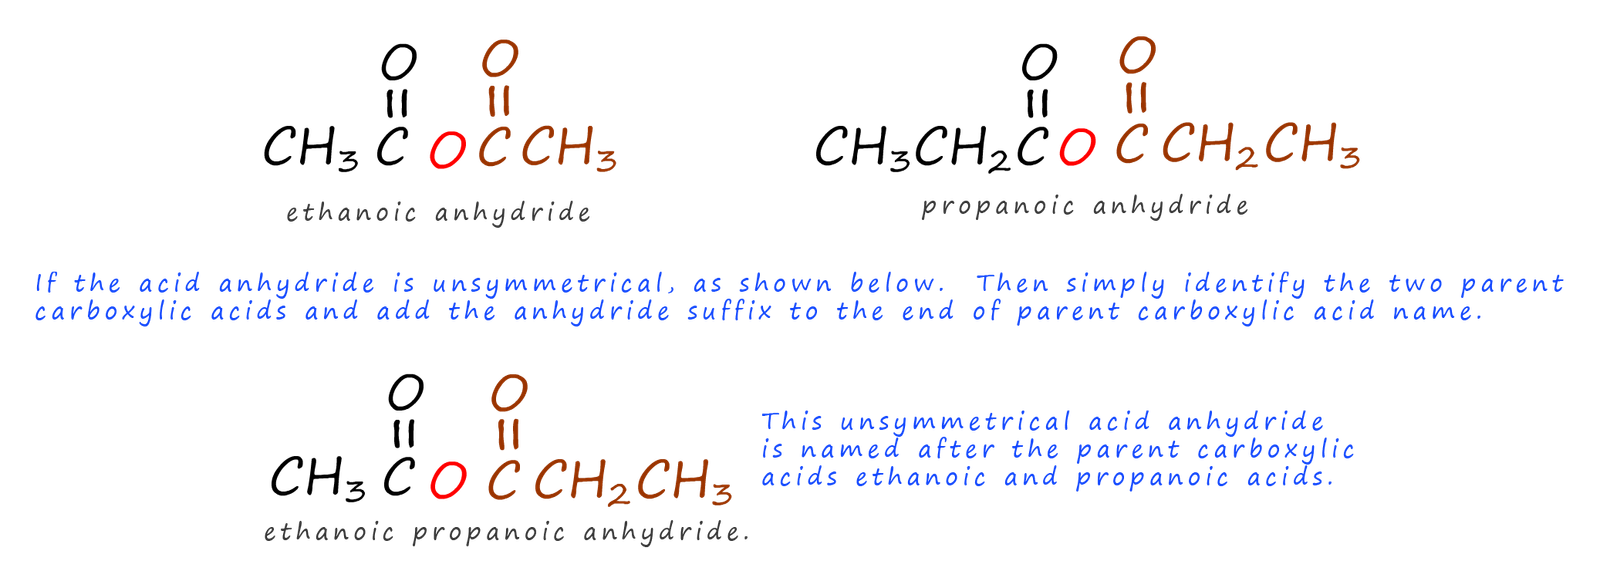 How to name acid anhydride molecules